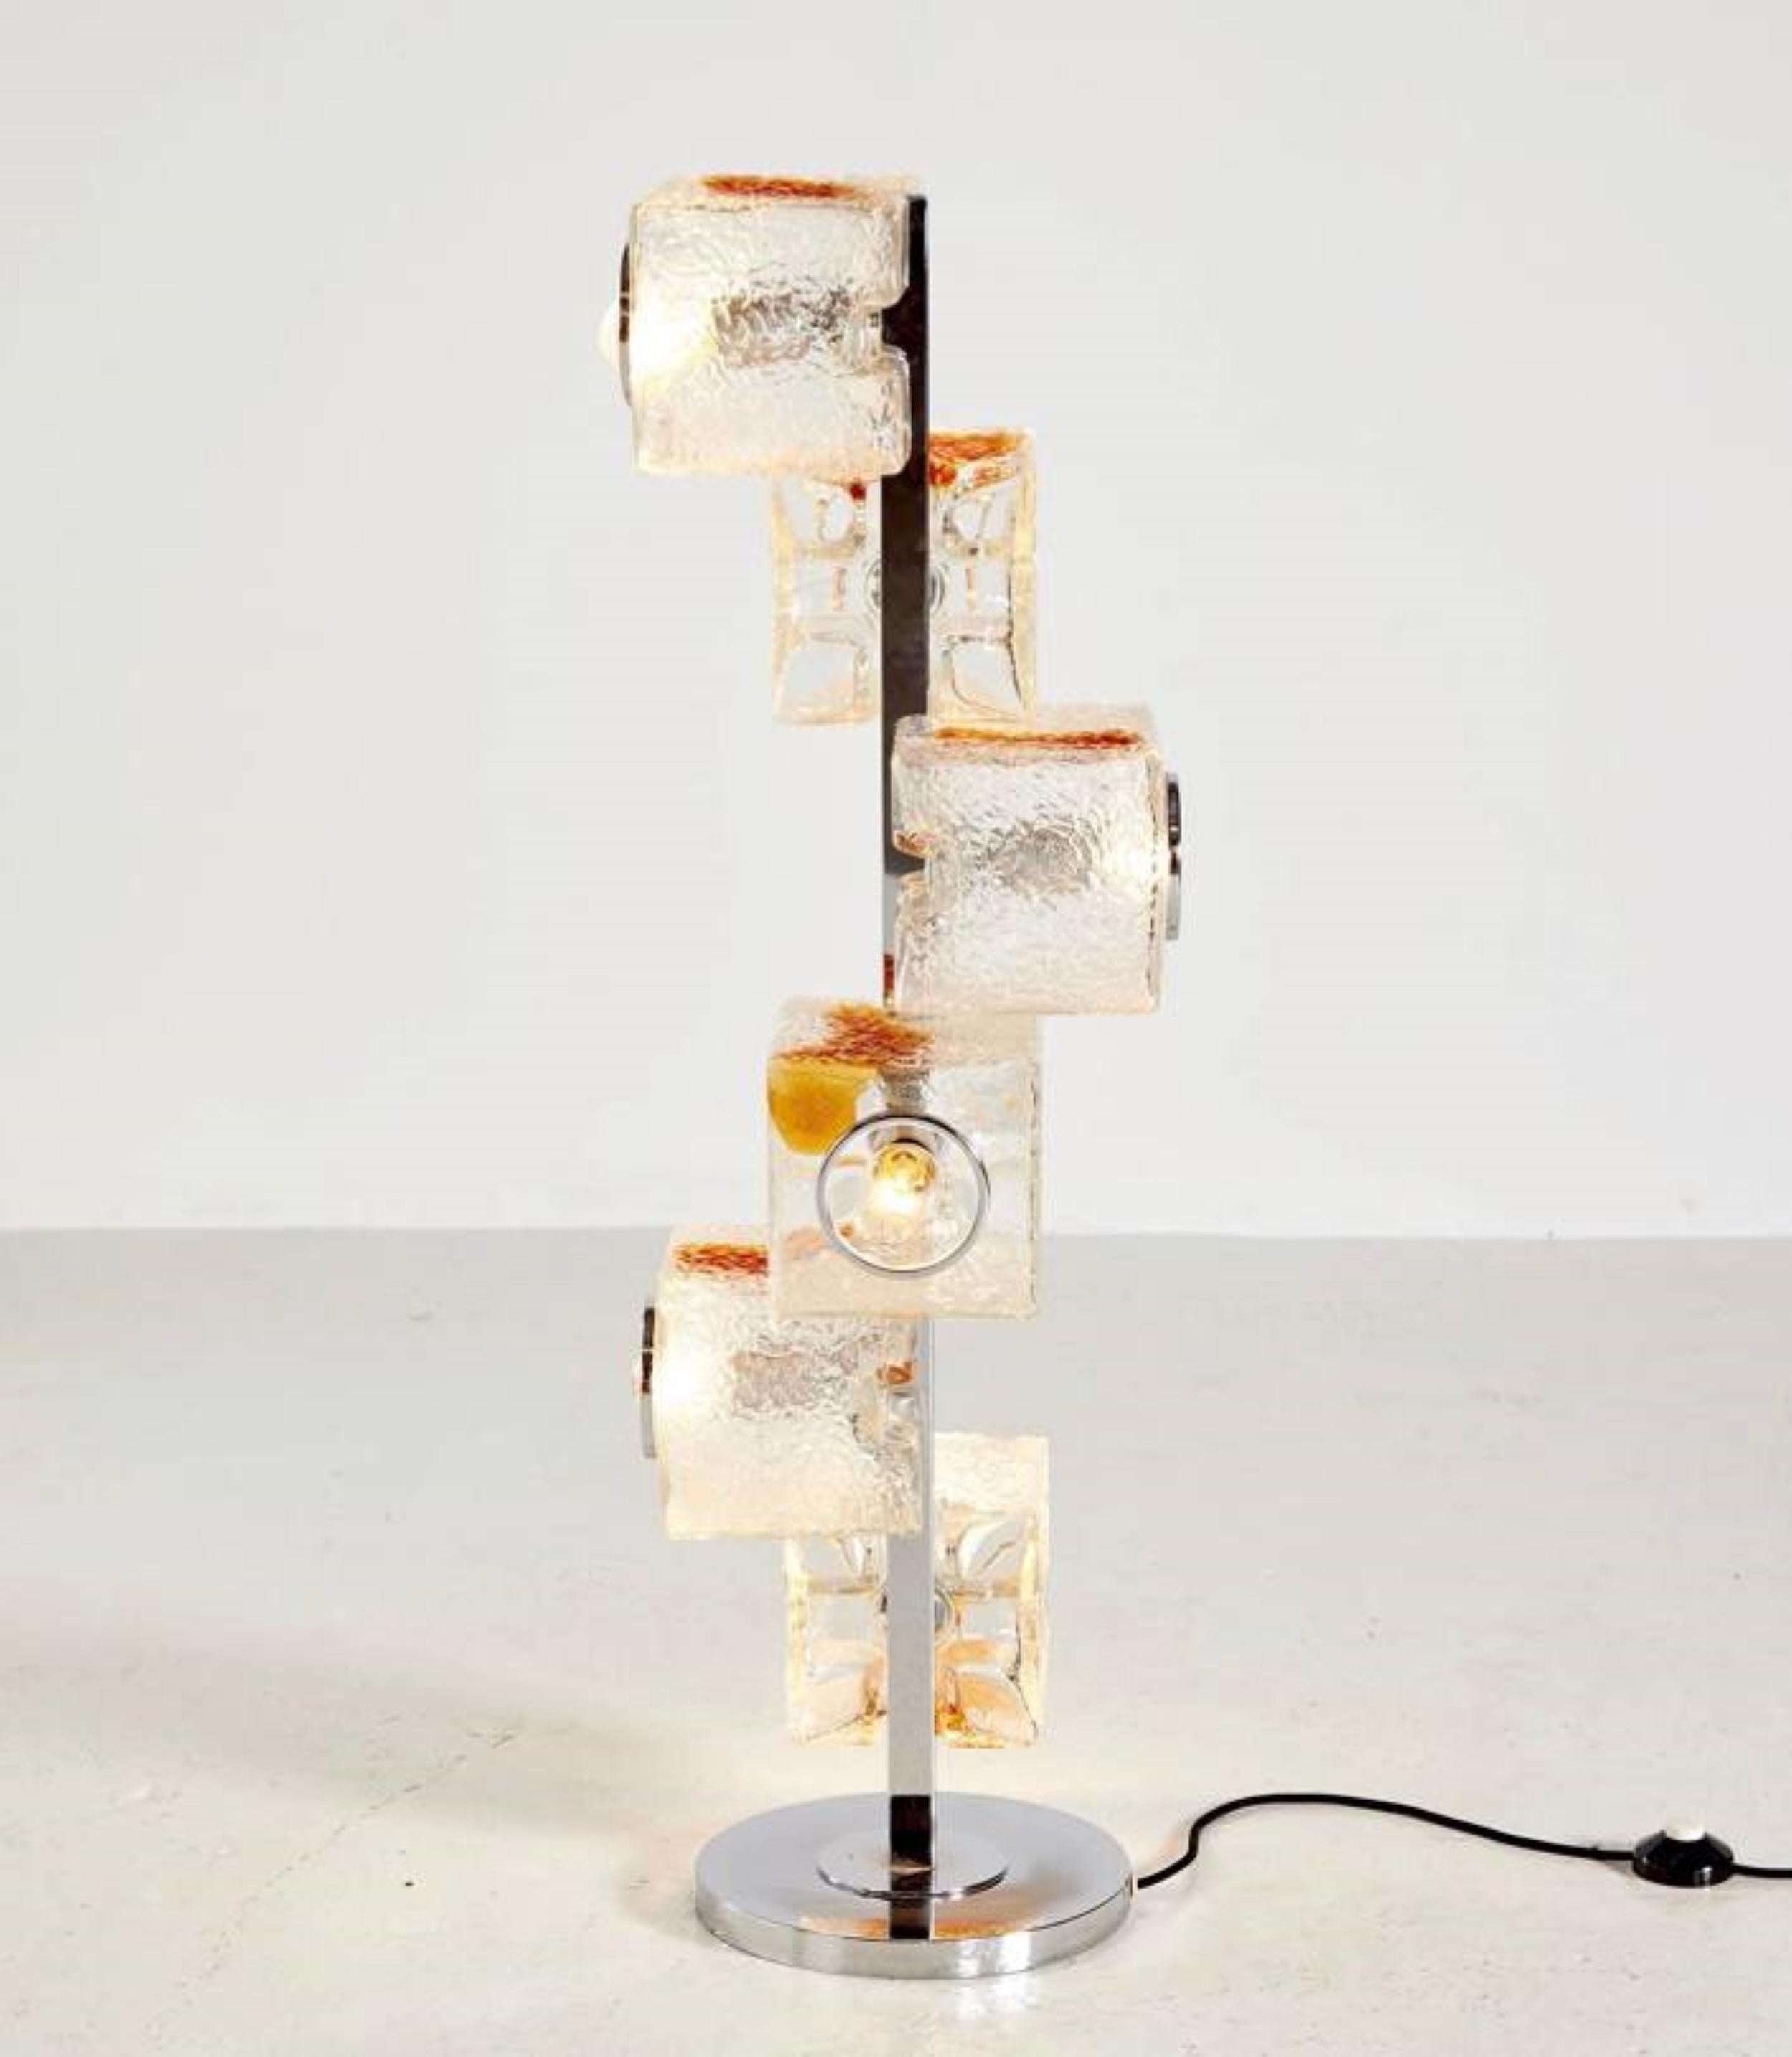 Hand-Crafted Toni zuccheri glass cube floor lamp by Toni Zuccheri for VeArt 1970.